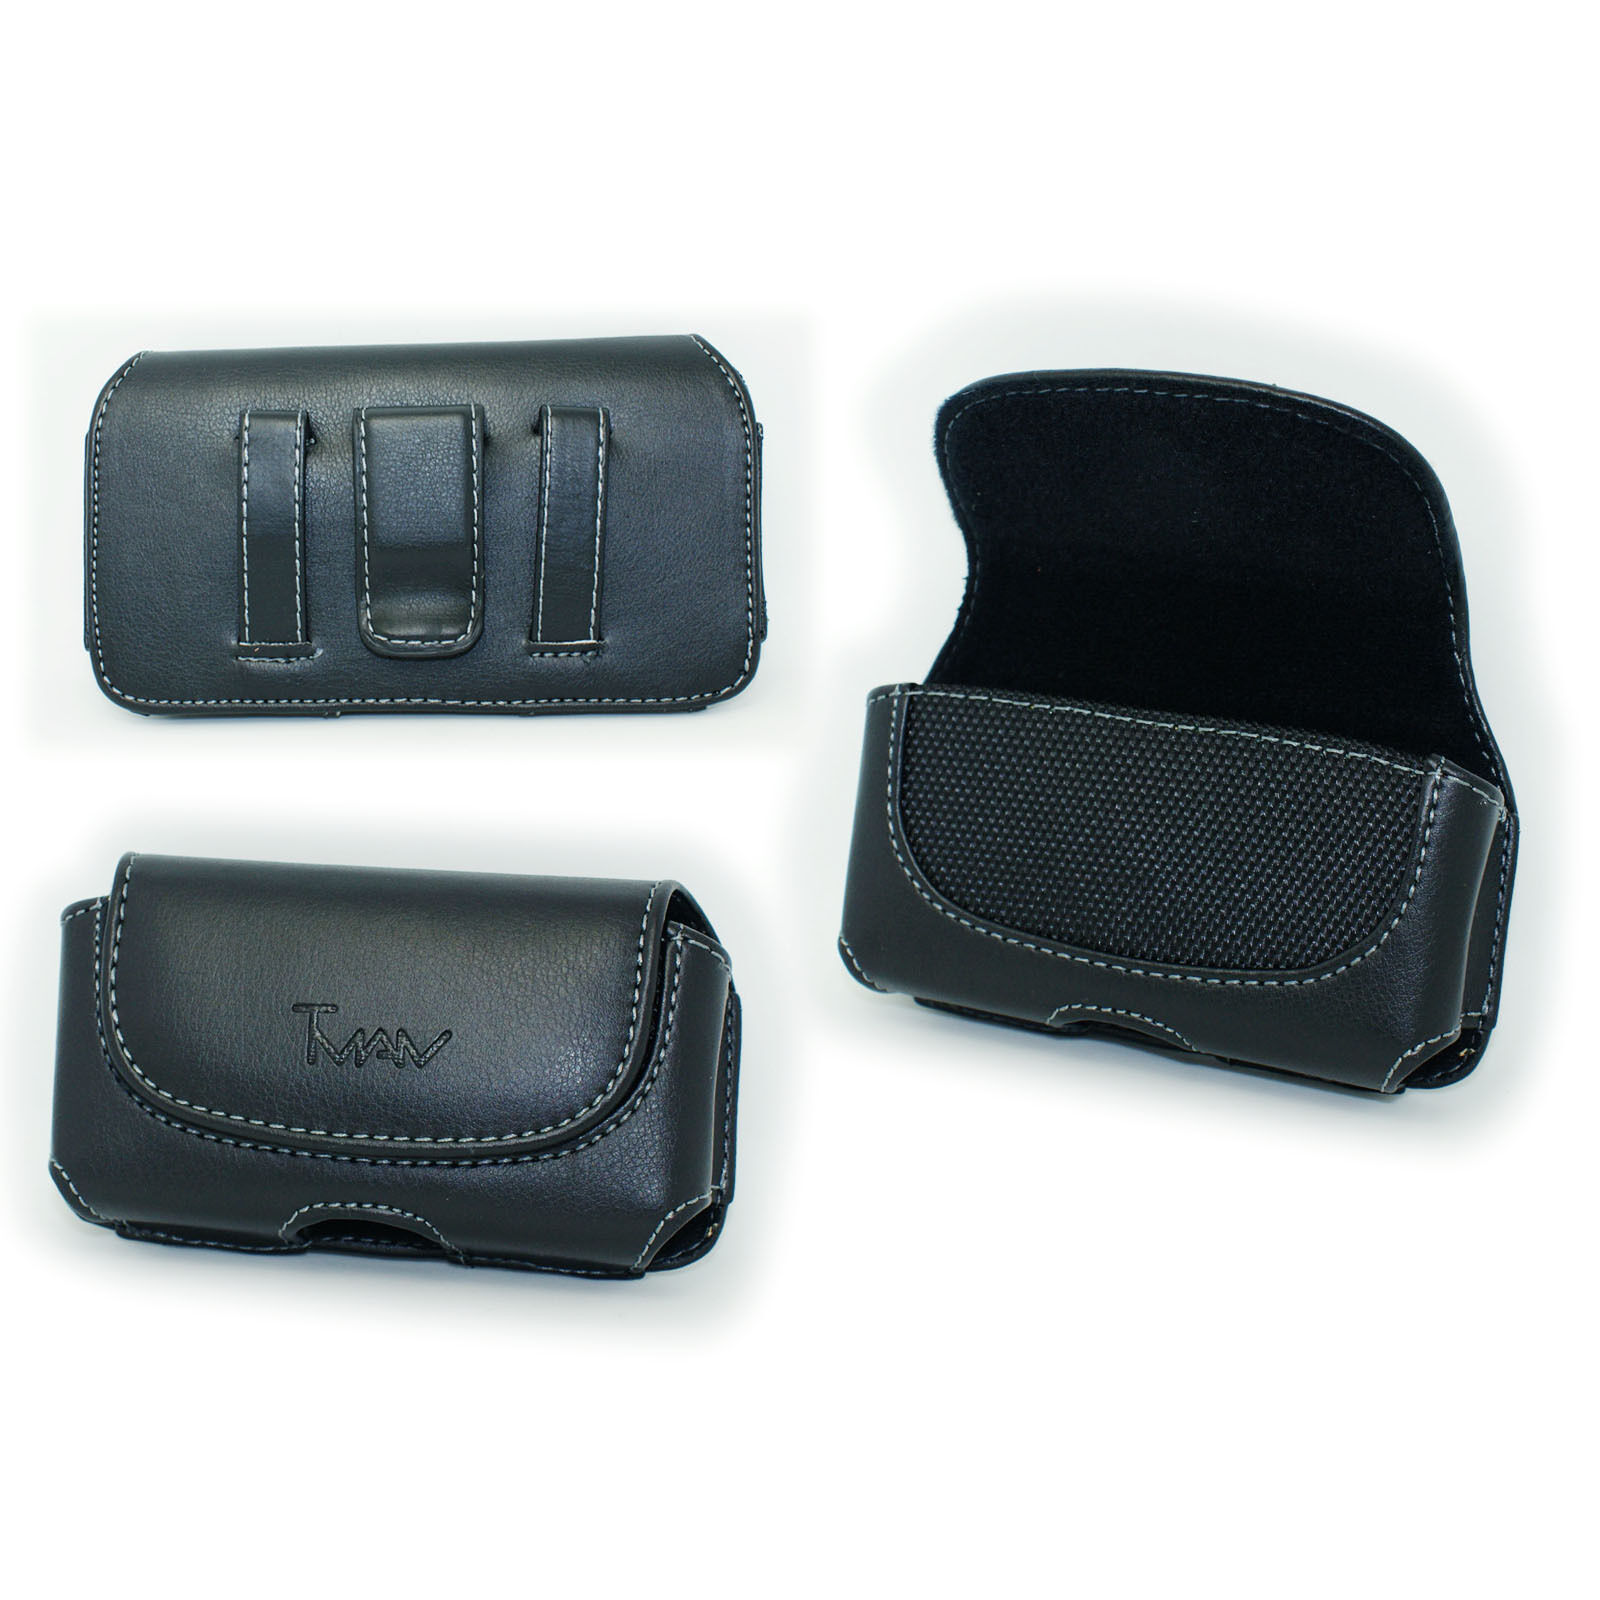 Belt Holster Pouch for Samsung Galaxy J7 J7v (fits with Incipio DualPro Case) - $19.99